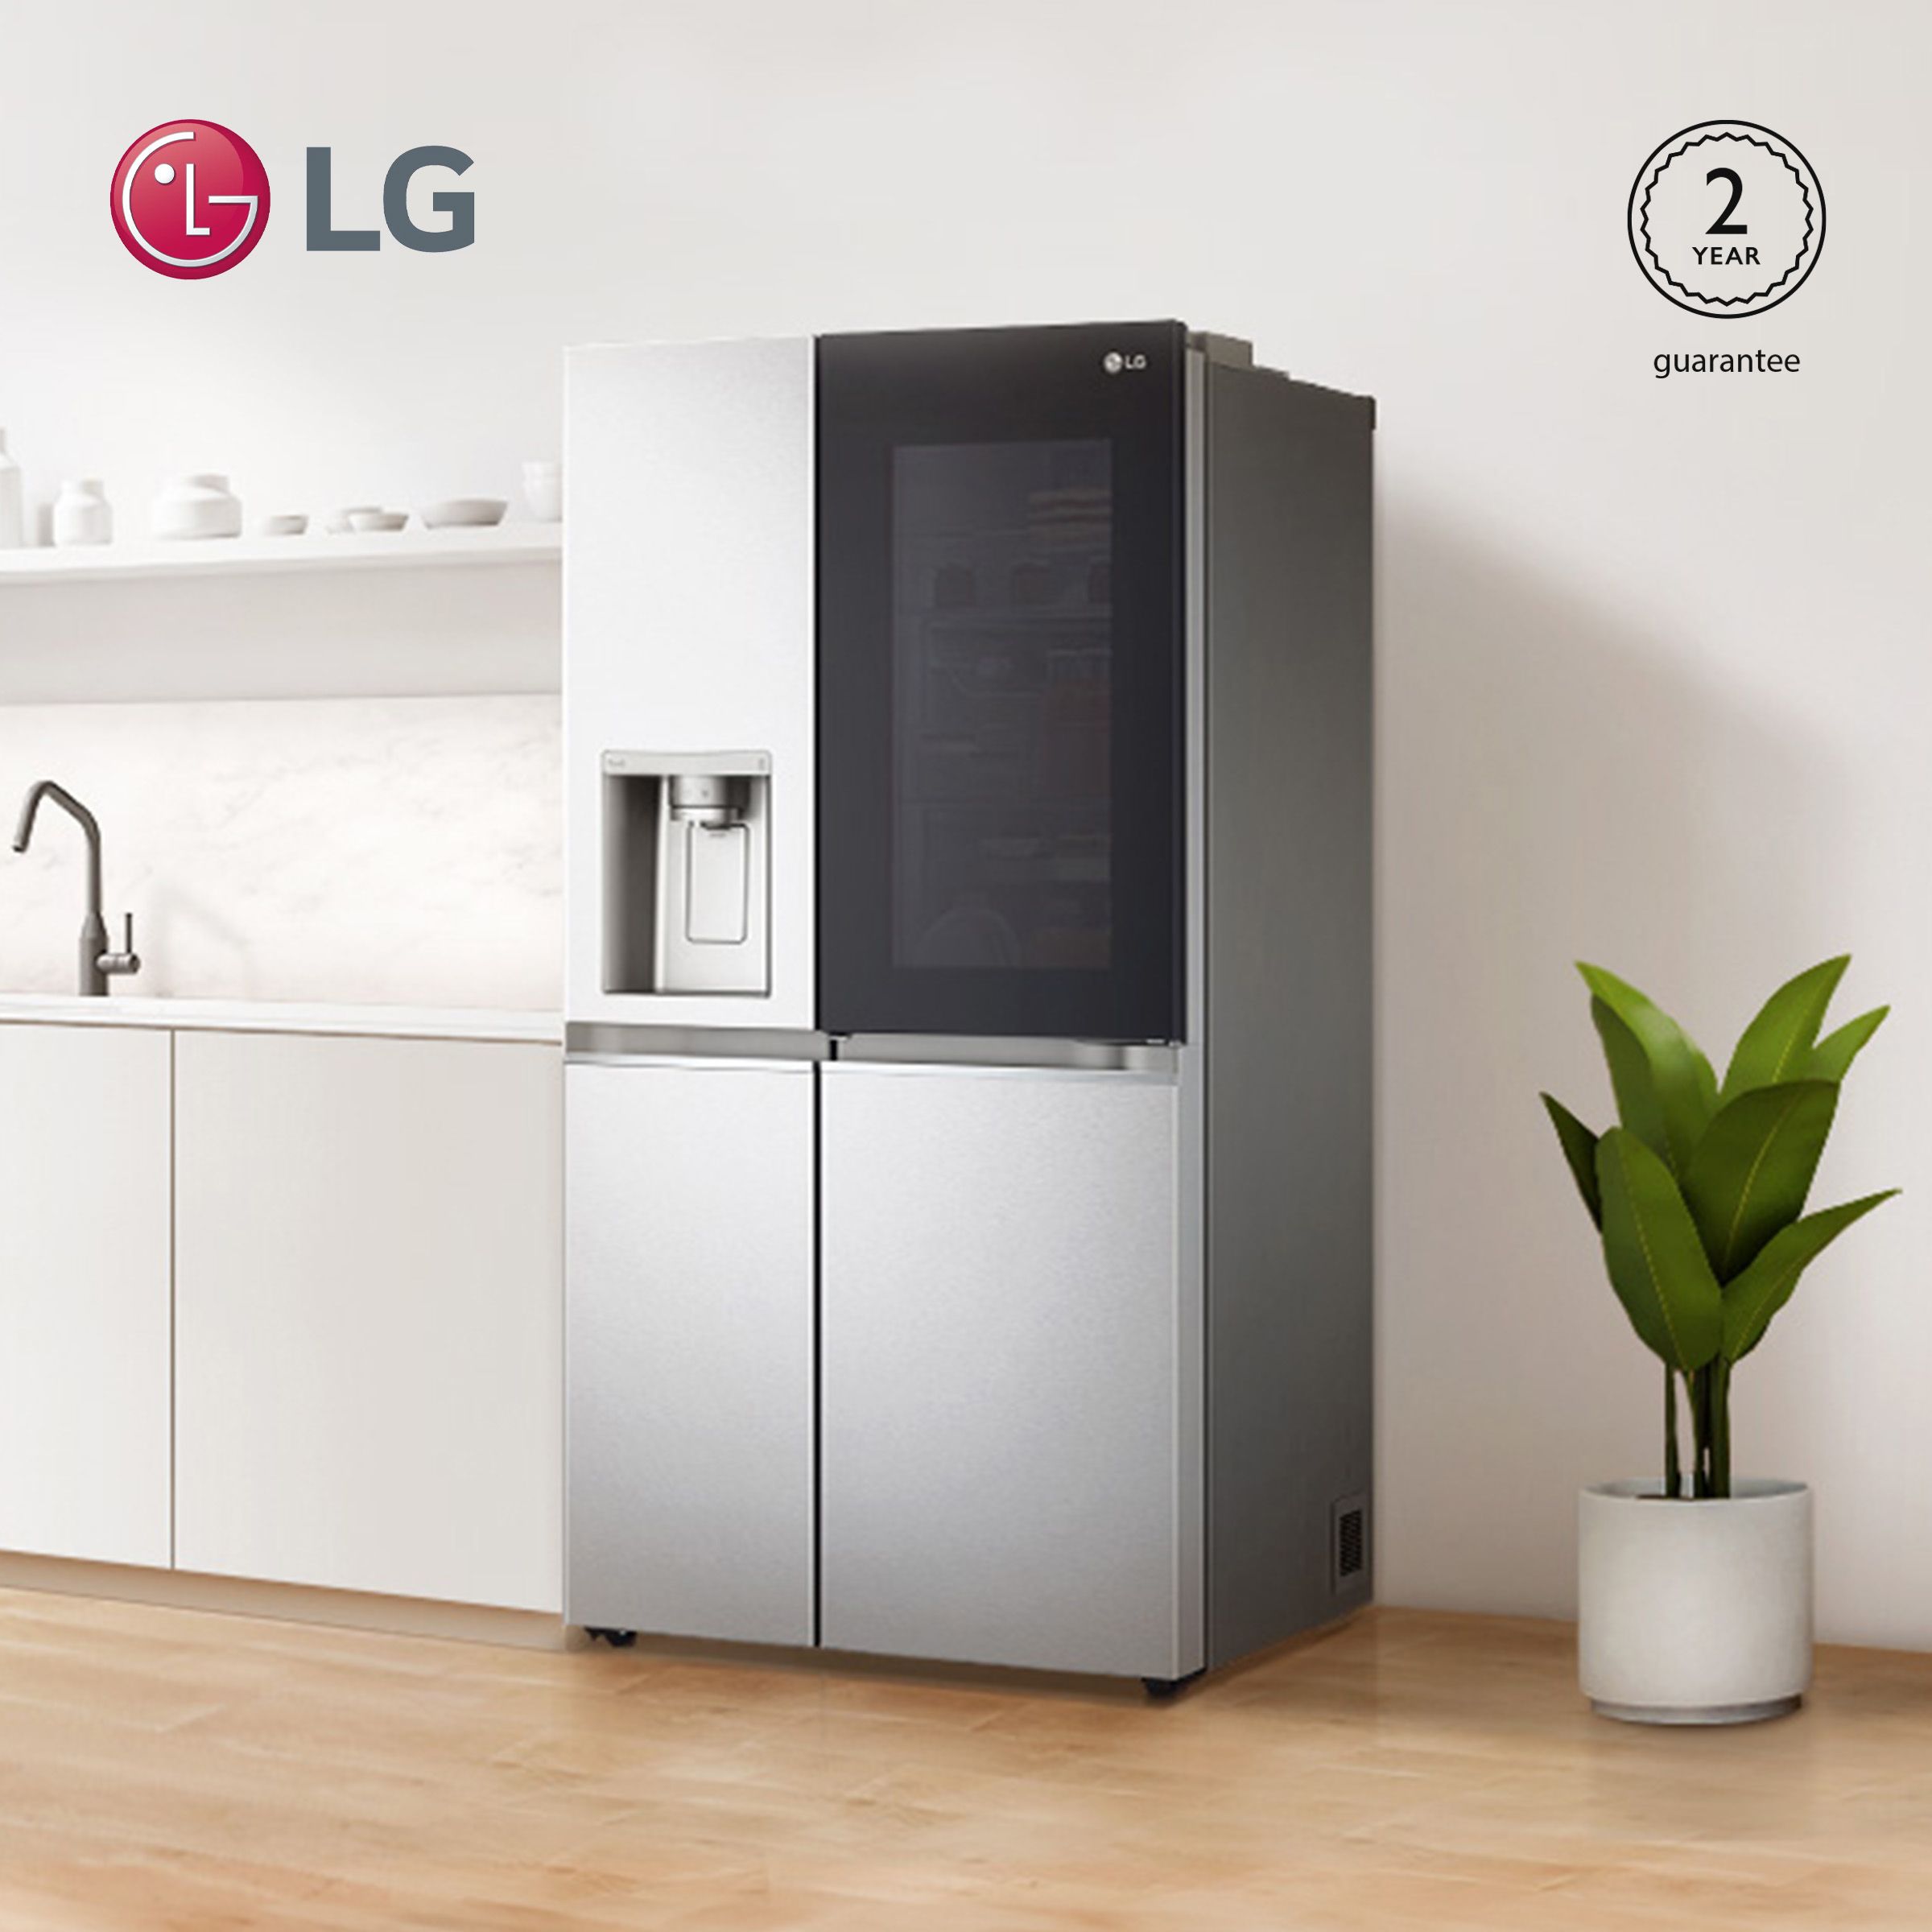 LG  InstaView™ Look inside without letting the cool out - Interest Free Credit on selected LG ref products